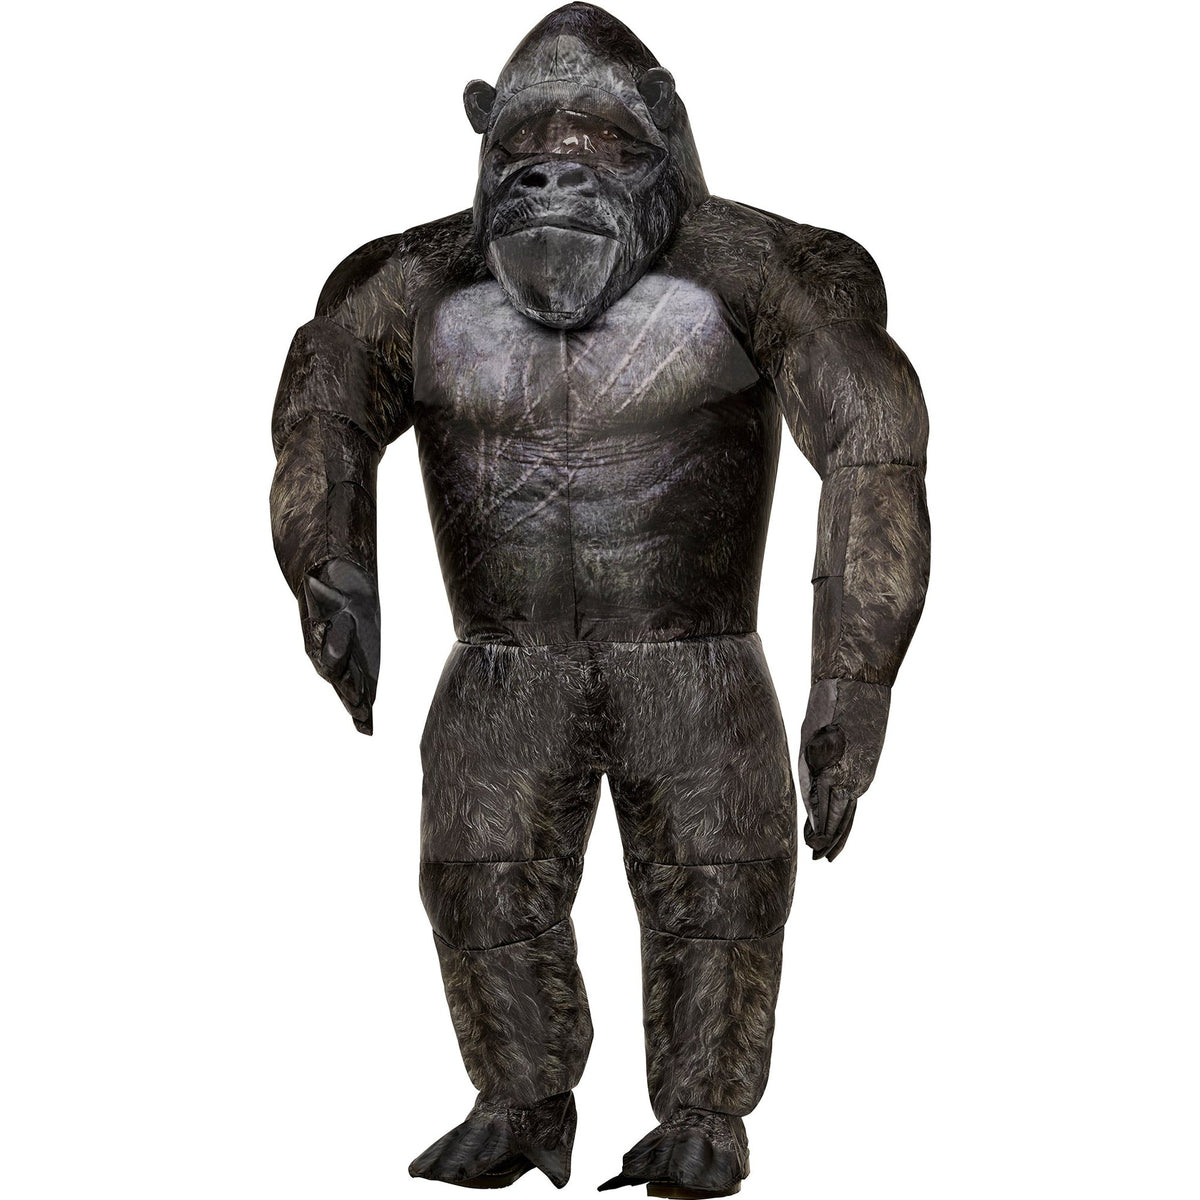 IN SPIRIT DESIGNS Costumes Inflatable Kong Costume for Kids, Godzilla x Kong: The New Empire